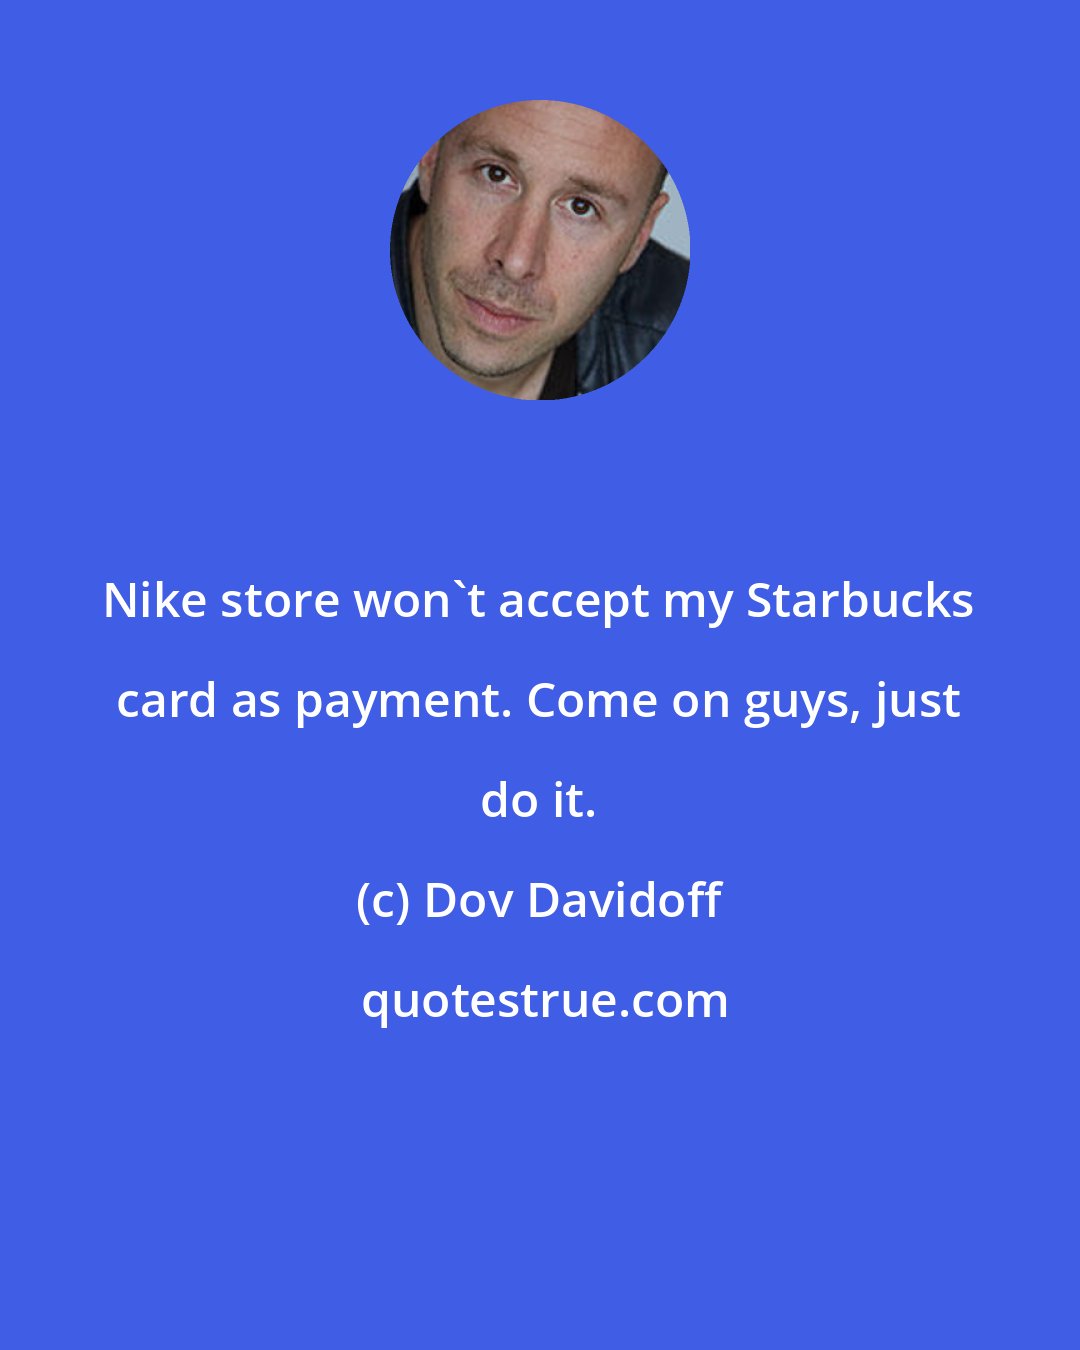 Dov Davidoff: Nike store won't accept my Starbucks card as payment. Come on guys, just do it.